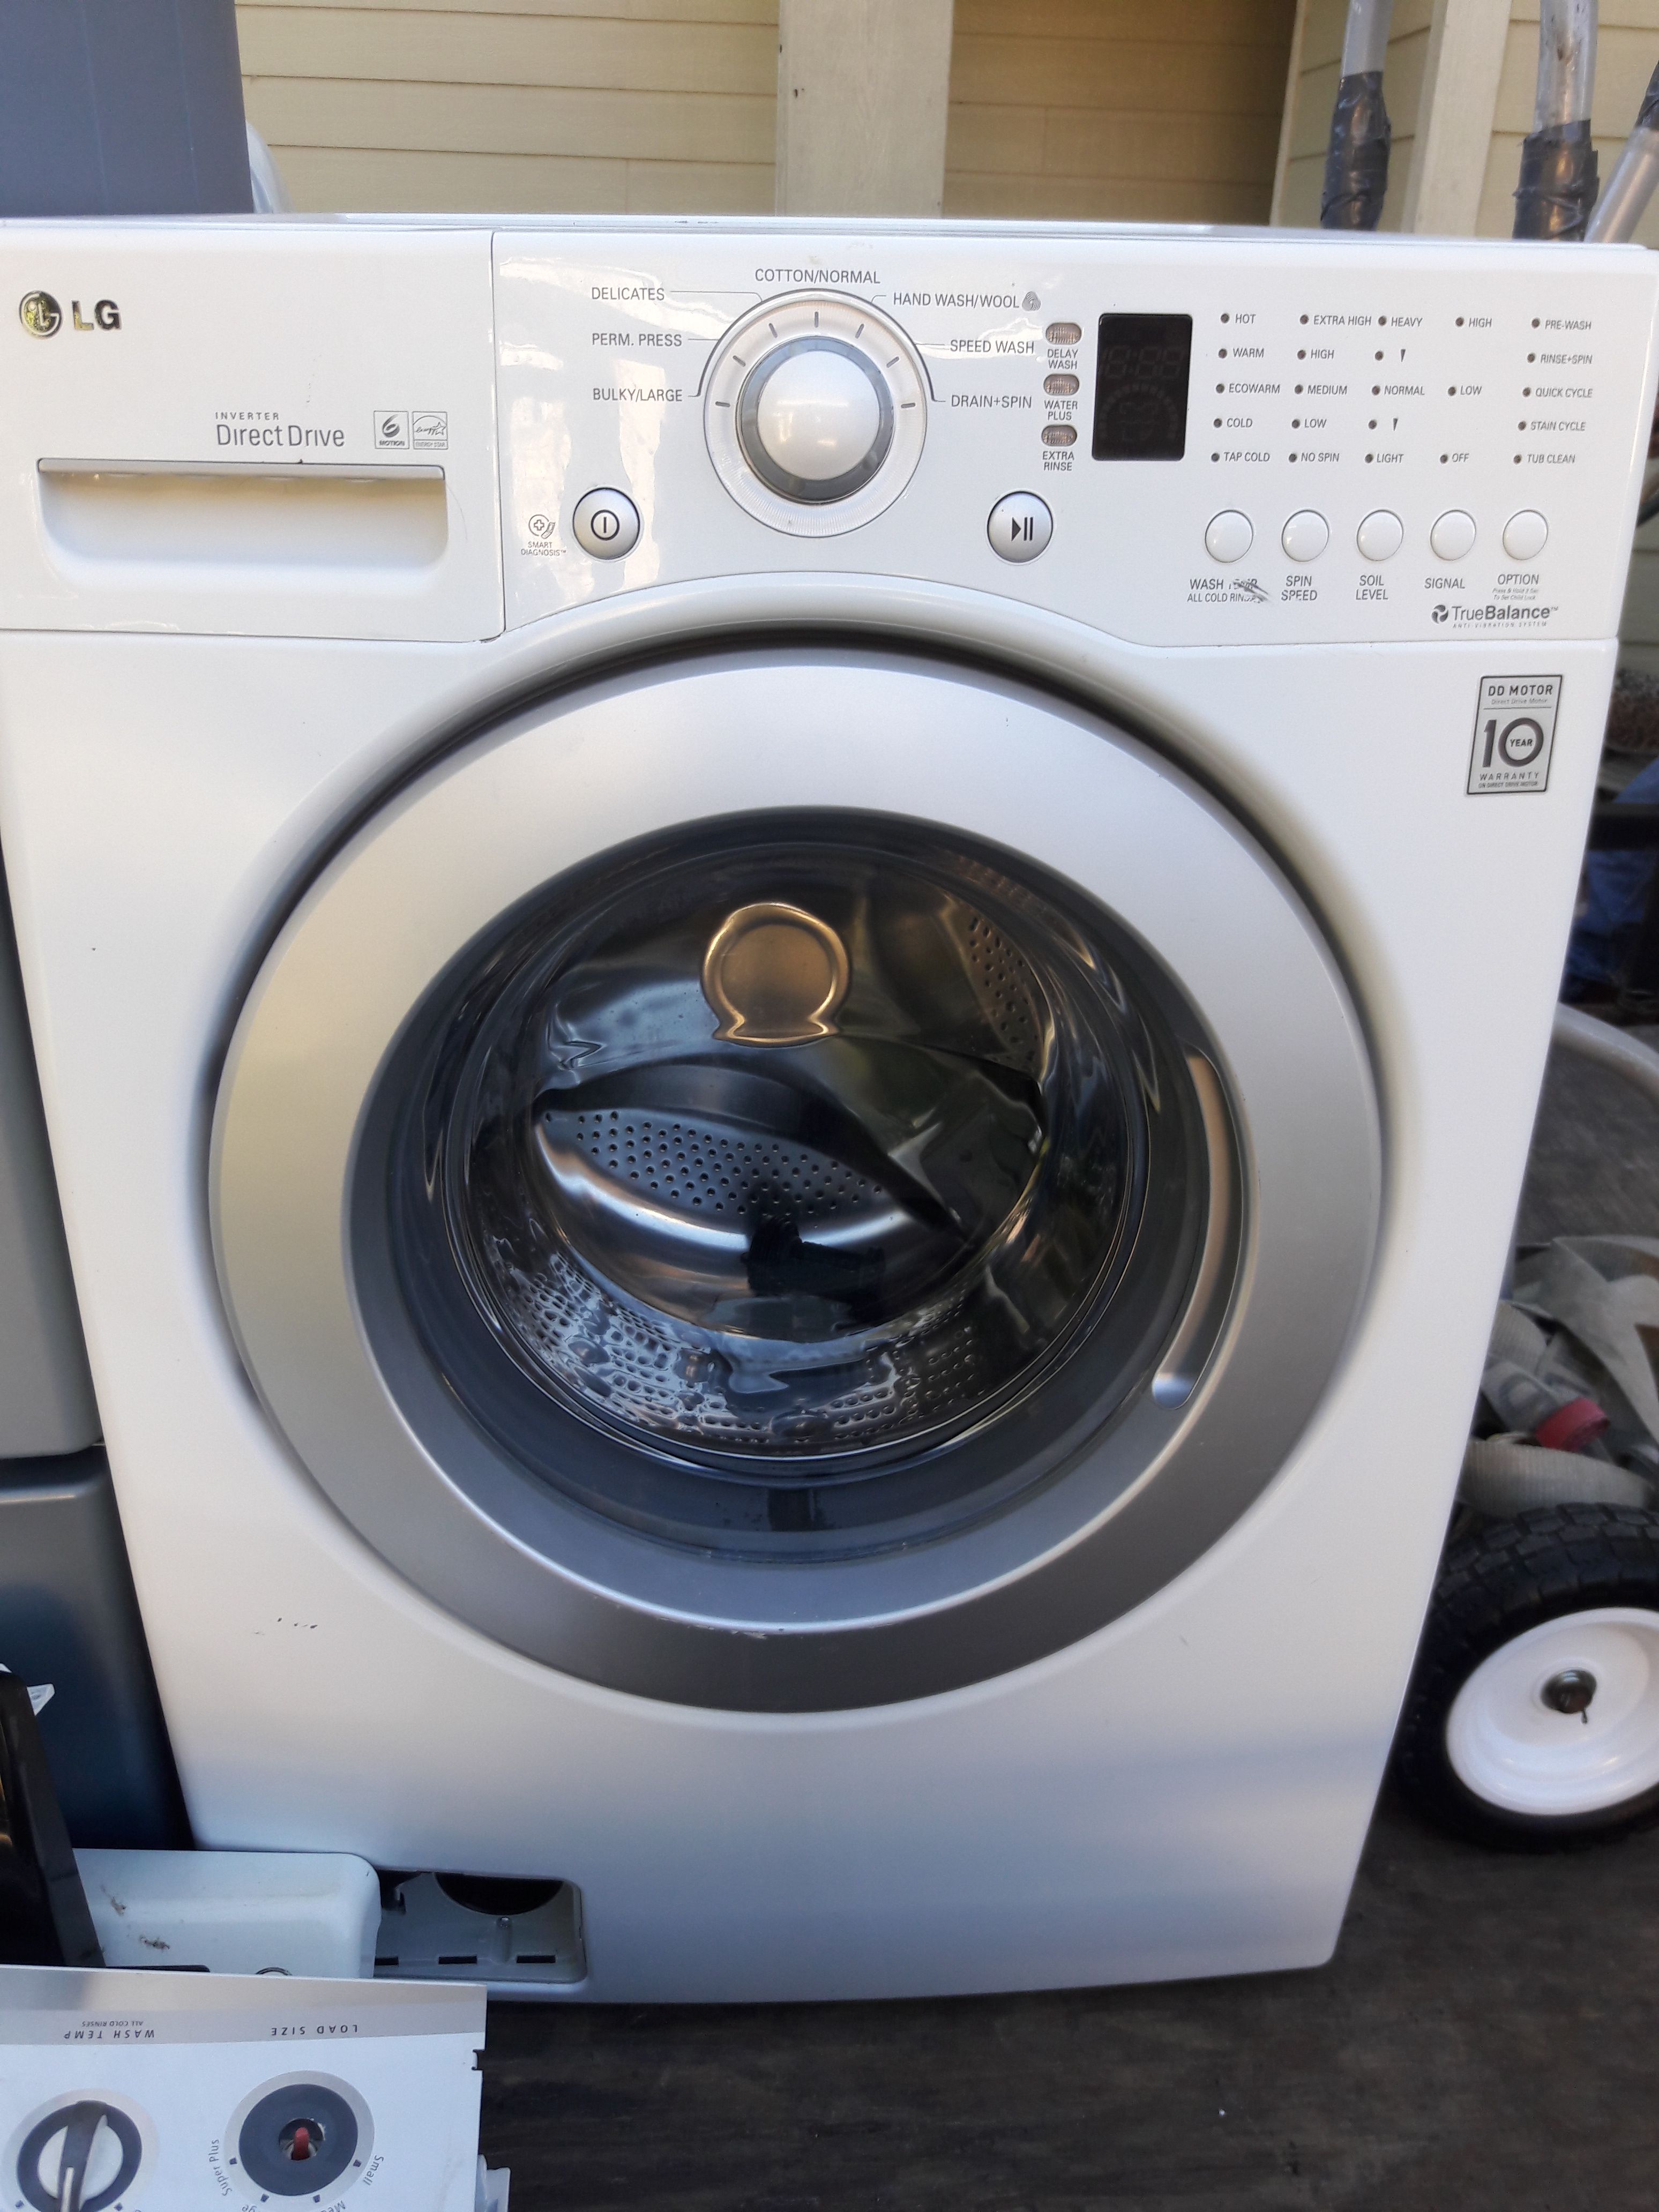 L.g tromm front load washer